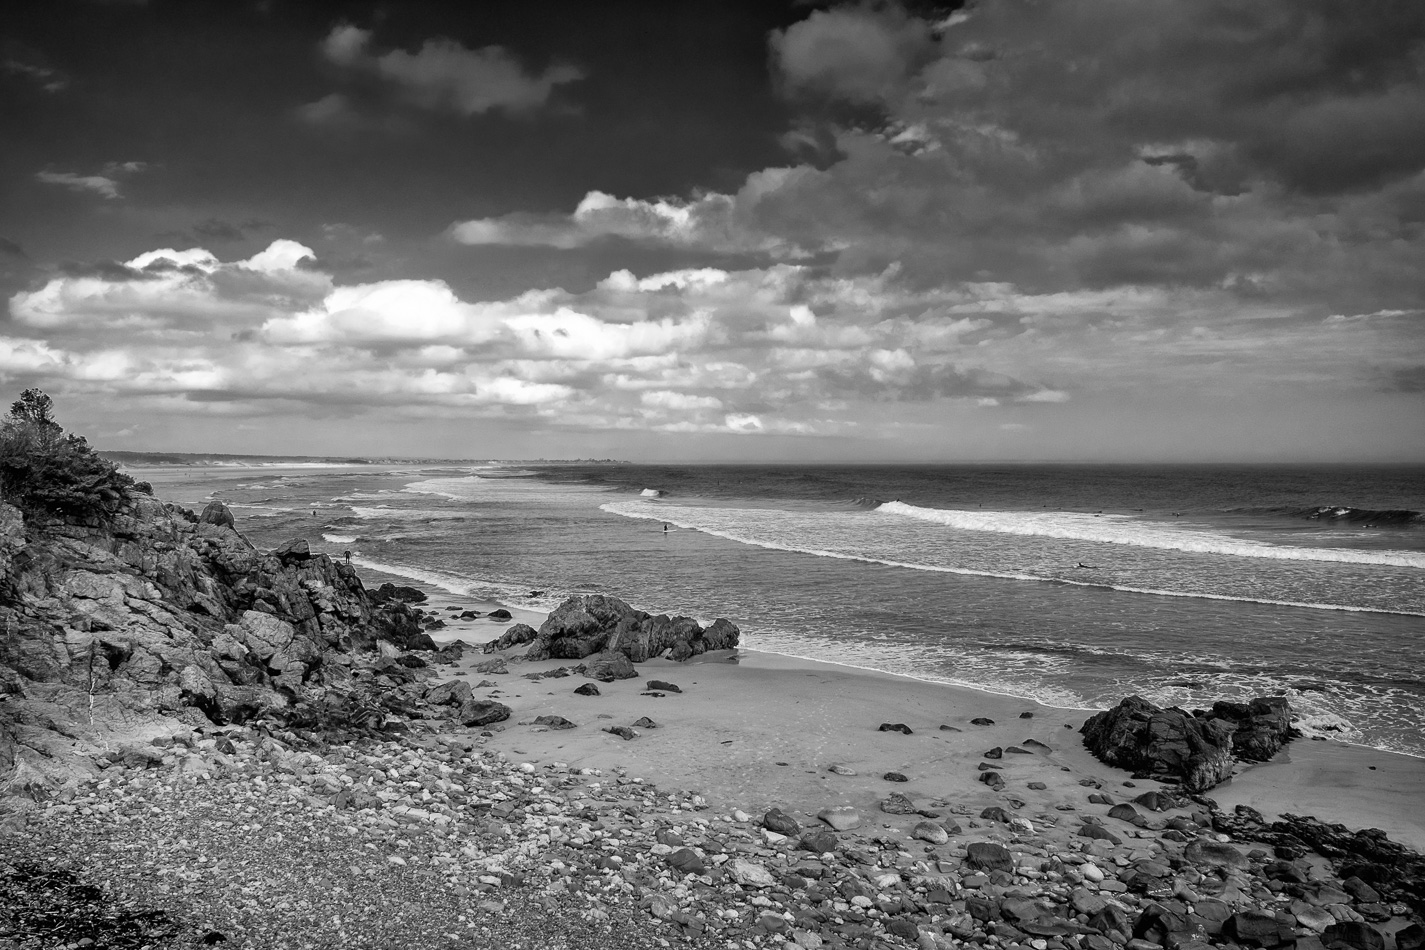 Black and white photo of a rocky beach in Ogunquit, ME